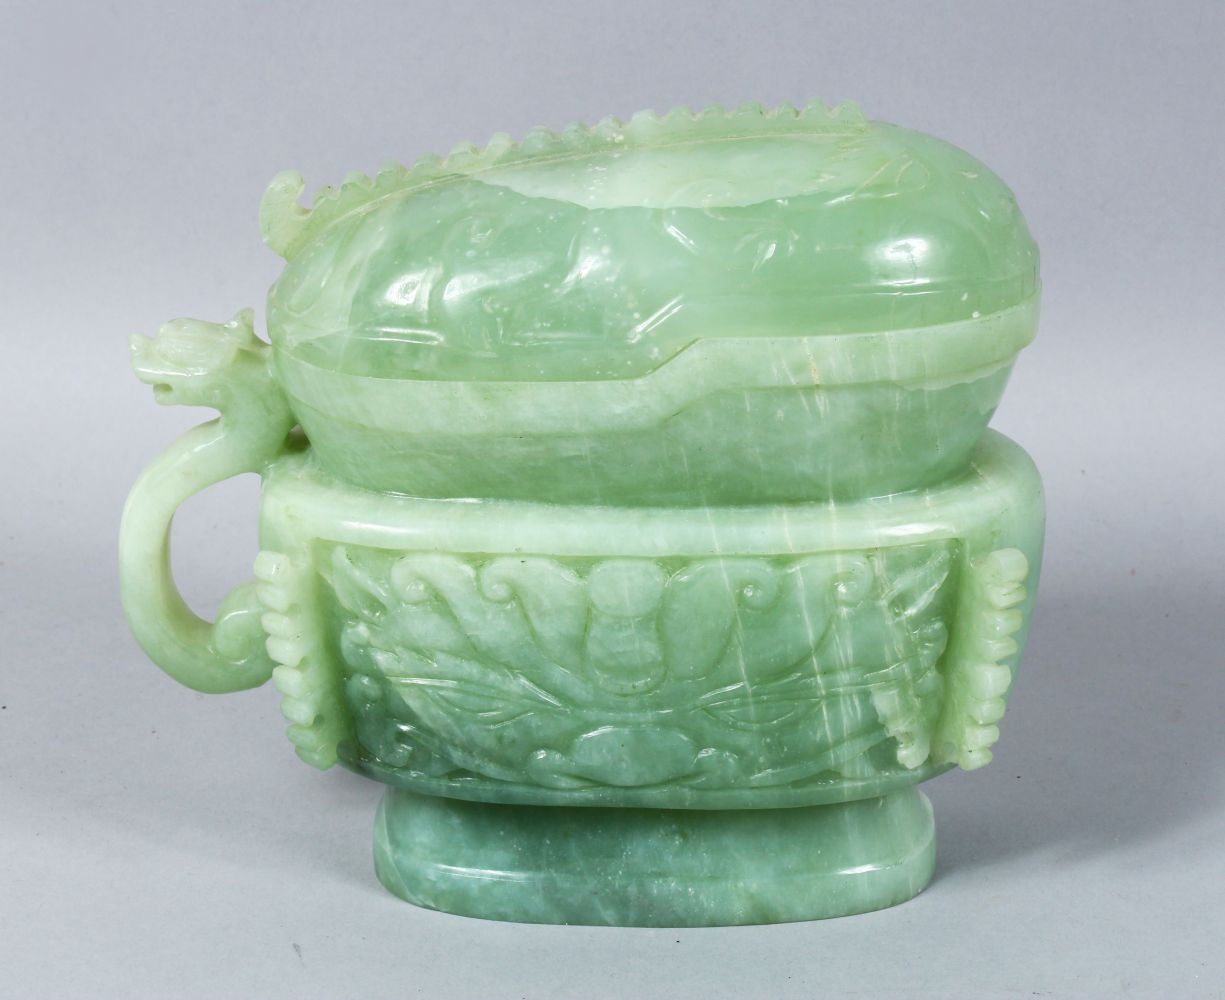 A LARGE 19TH / 20TH CENTURY CARVED JADE POT & COVER, carved in the form of a sauce boat, with a